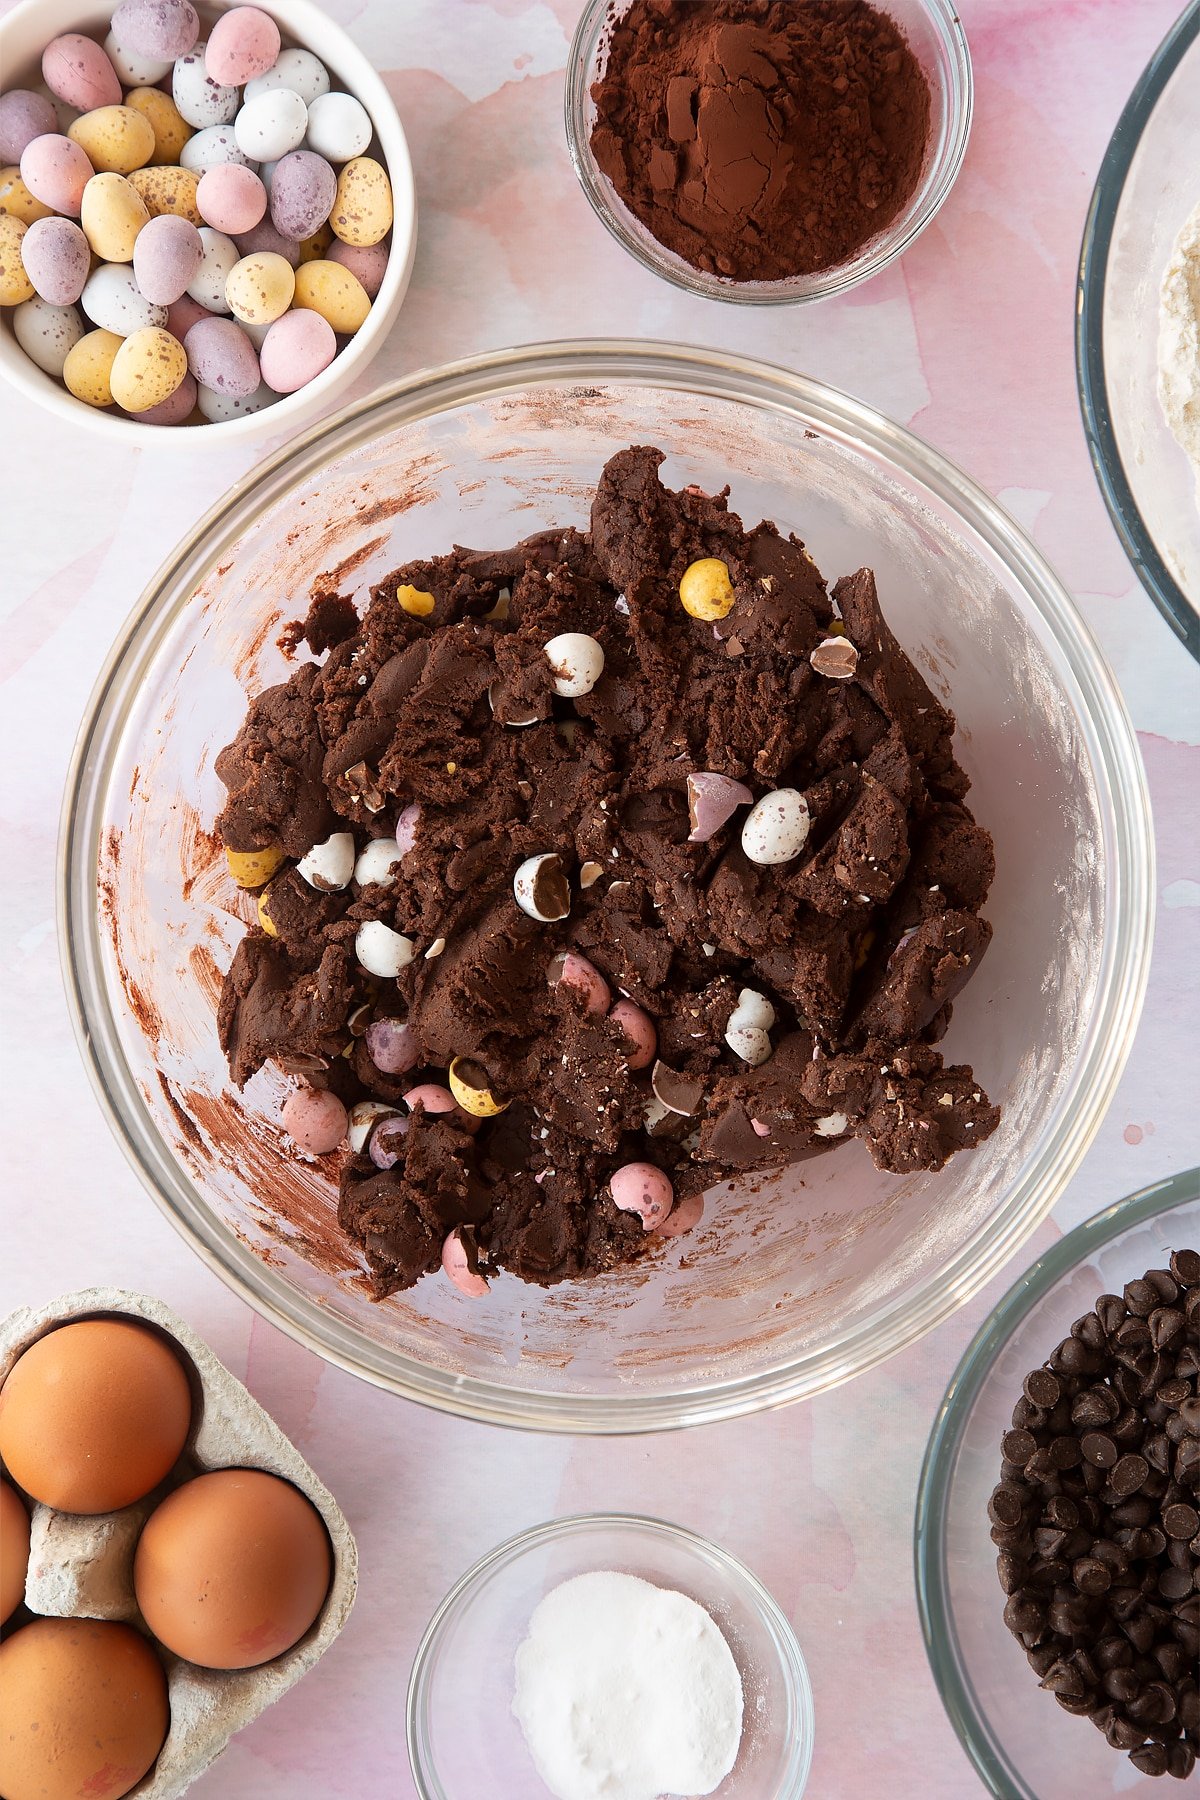 Chocolate cookie dough with Mini Eggs in a bowl. Ingredients to make Chocolate Easter cookies surround the bowl.